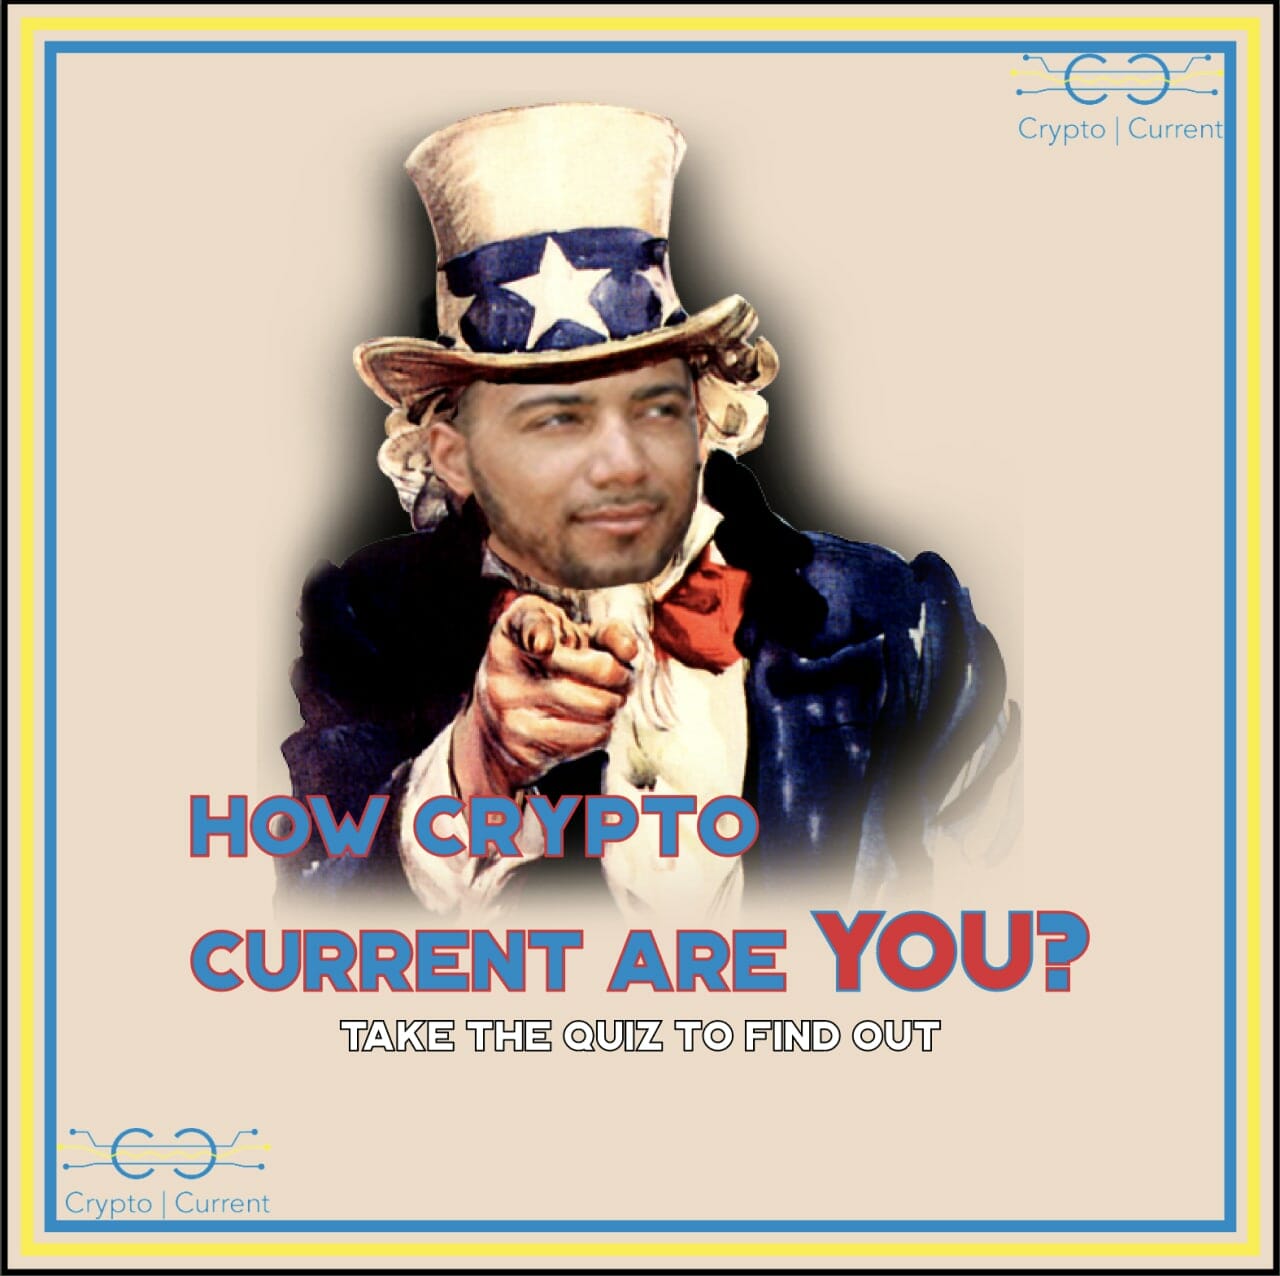 Are You Crypto Current?